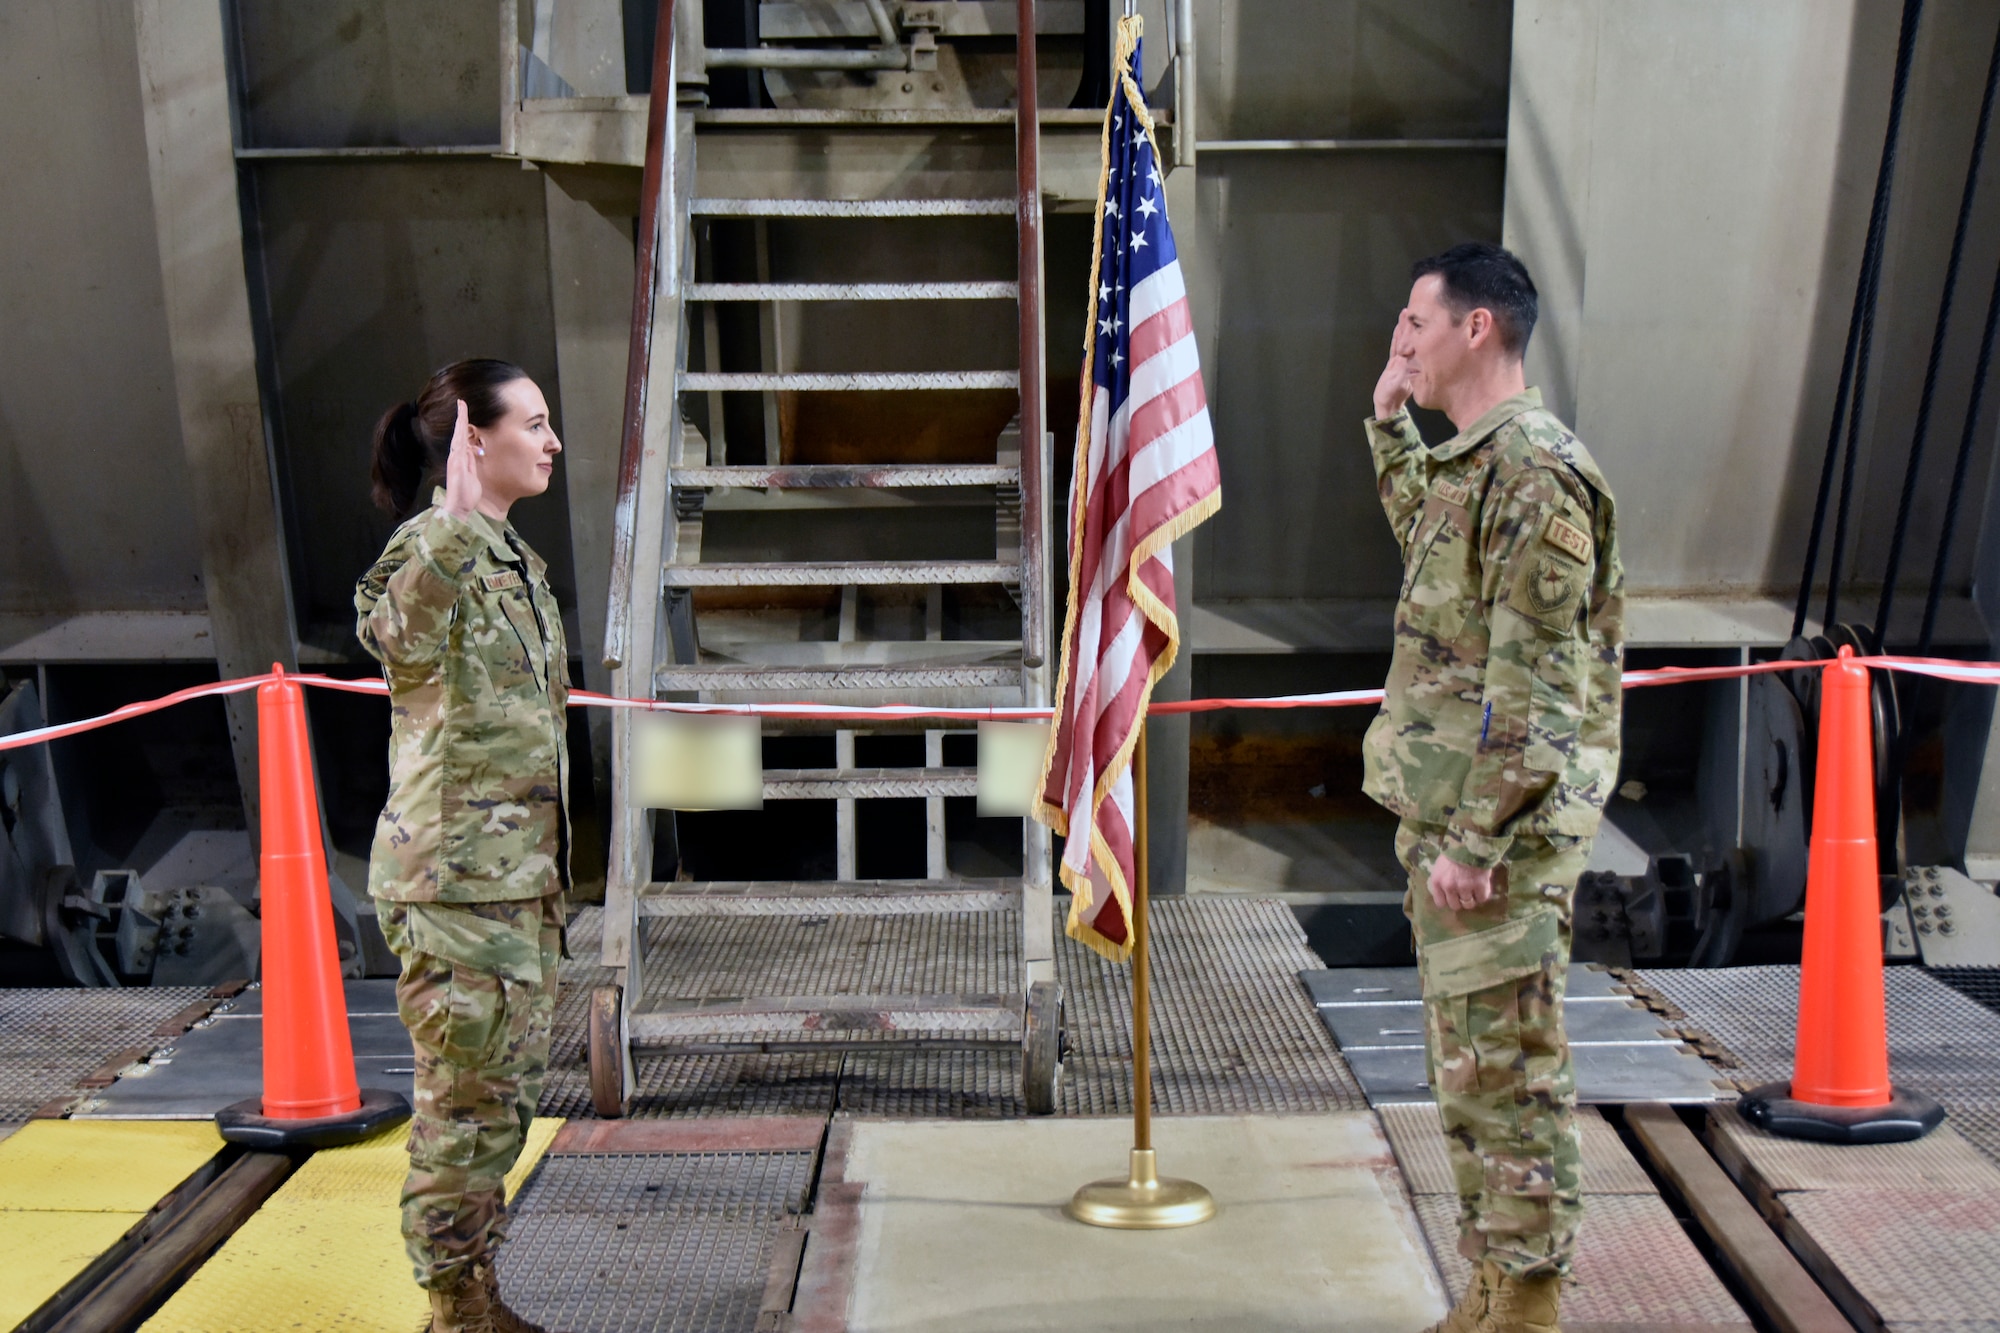 Lt. Col. James Gresham, commander, 716th Test Squadron, right, administers the oath of office to newly-promoted 1st Lt. Camden Dammeyer during a promotion ceremony Nov. 16, 2022, at Arnold Air Force Base, Tennessee. (U.S. Air Force photo by Bradley Hicks) (Images have been altered by obscuring test cell signage.)